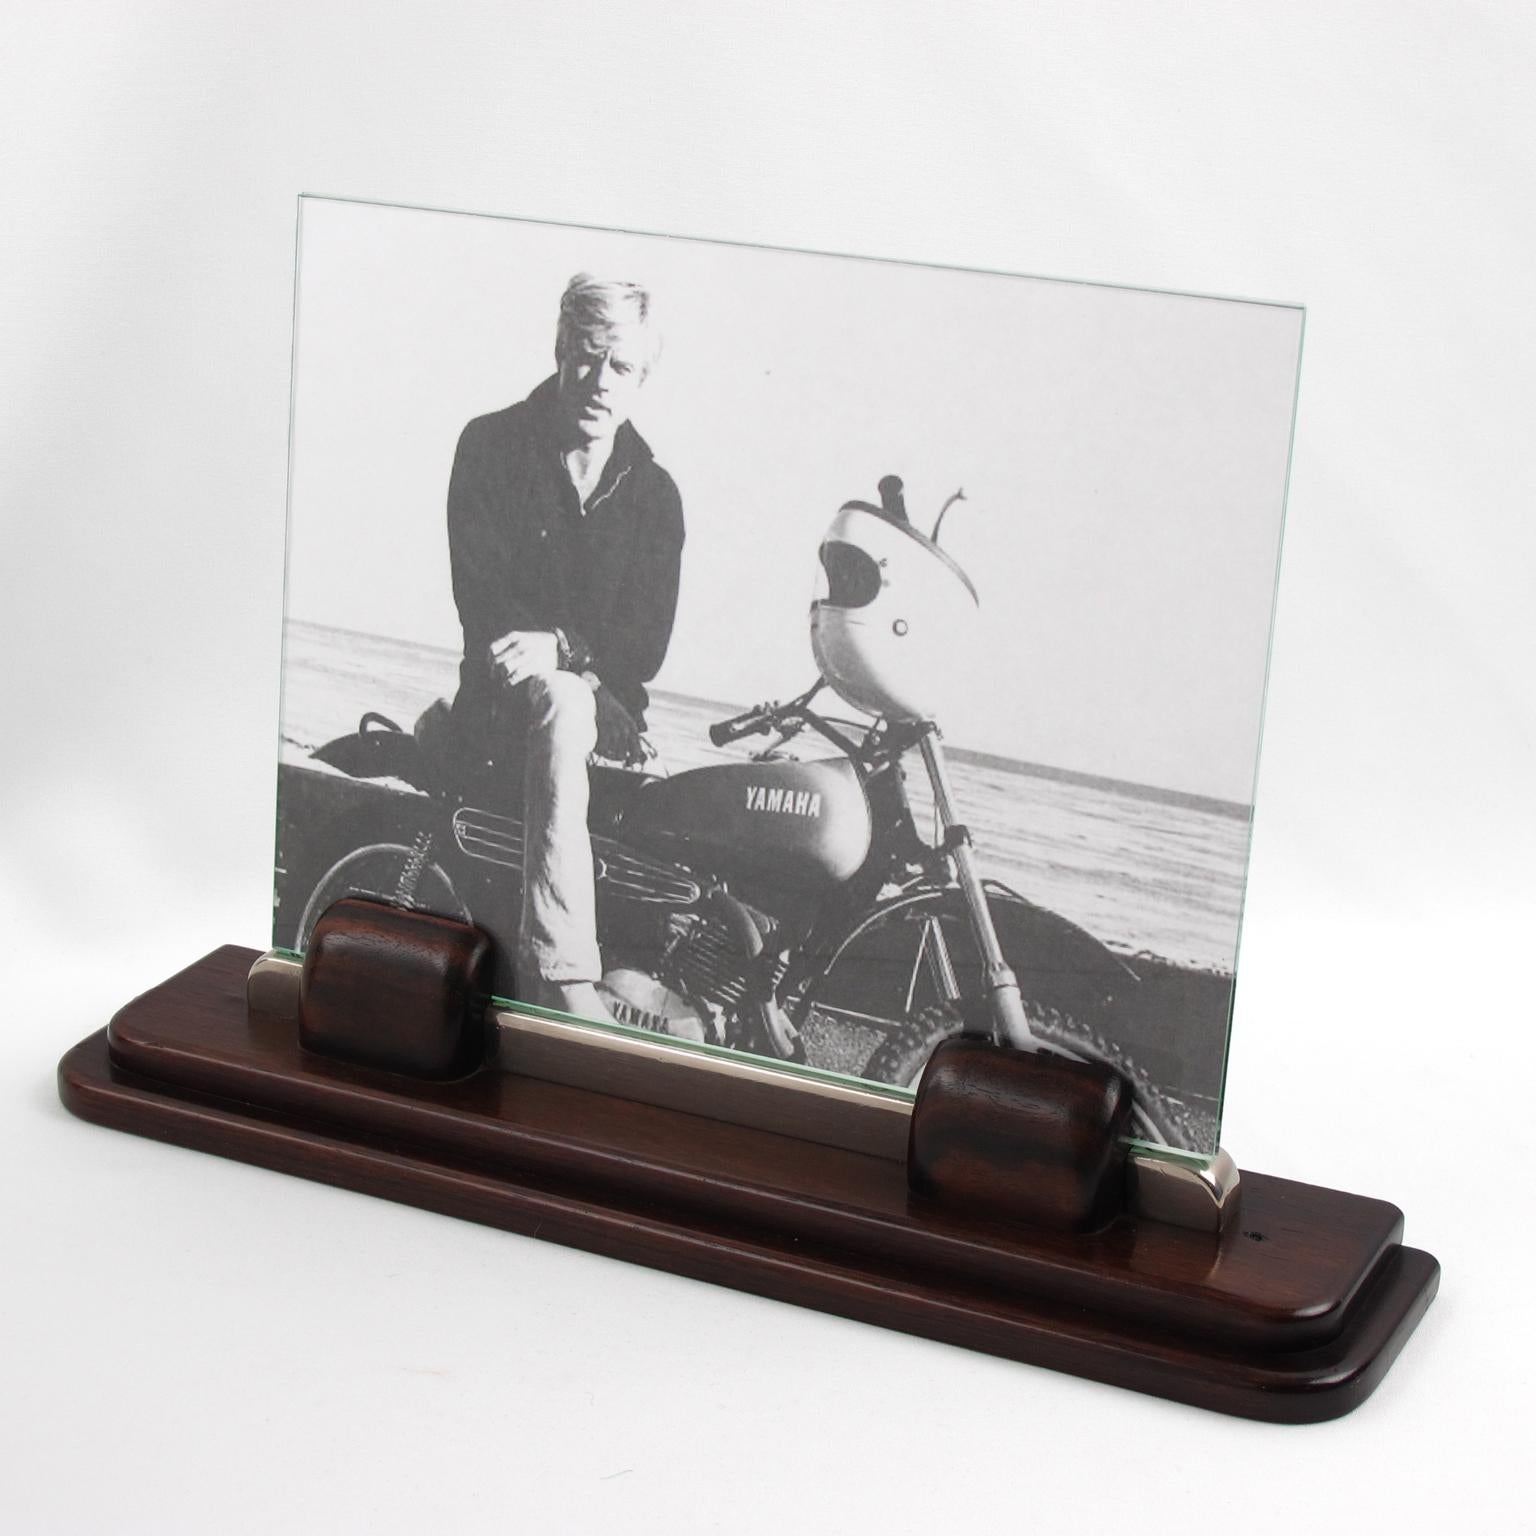 A charming Art Deco modernist picture photo frame, featuring thick hand-rubbed Macassar wood plinth compliment with same wood holders and ornate with Industrial thick chrome stick attached by visible chromed screws. The frame is complete with its